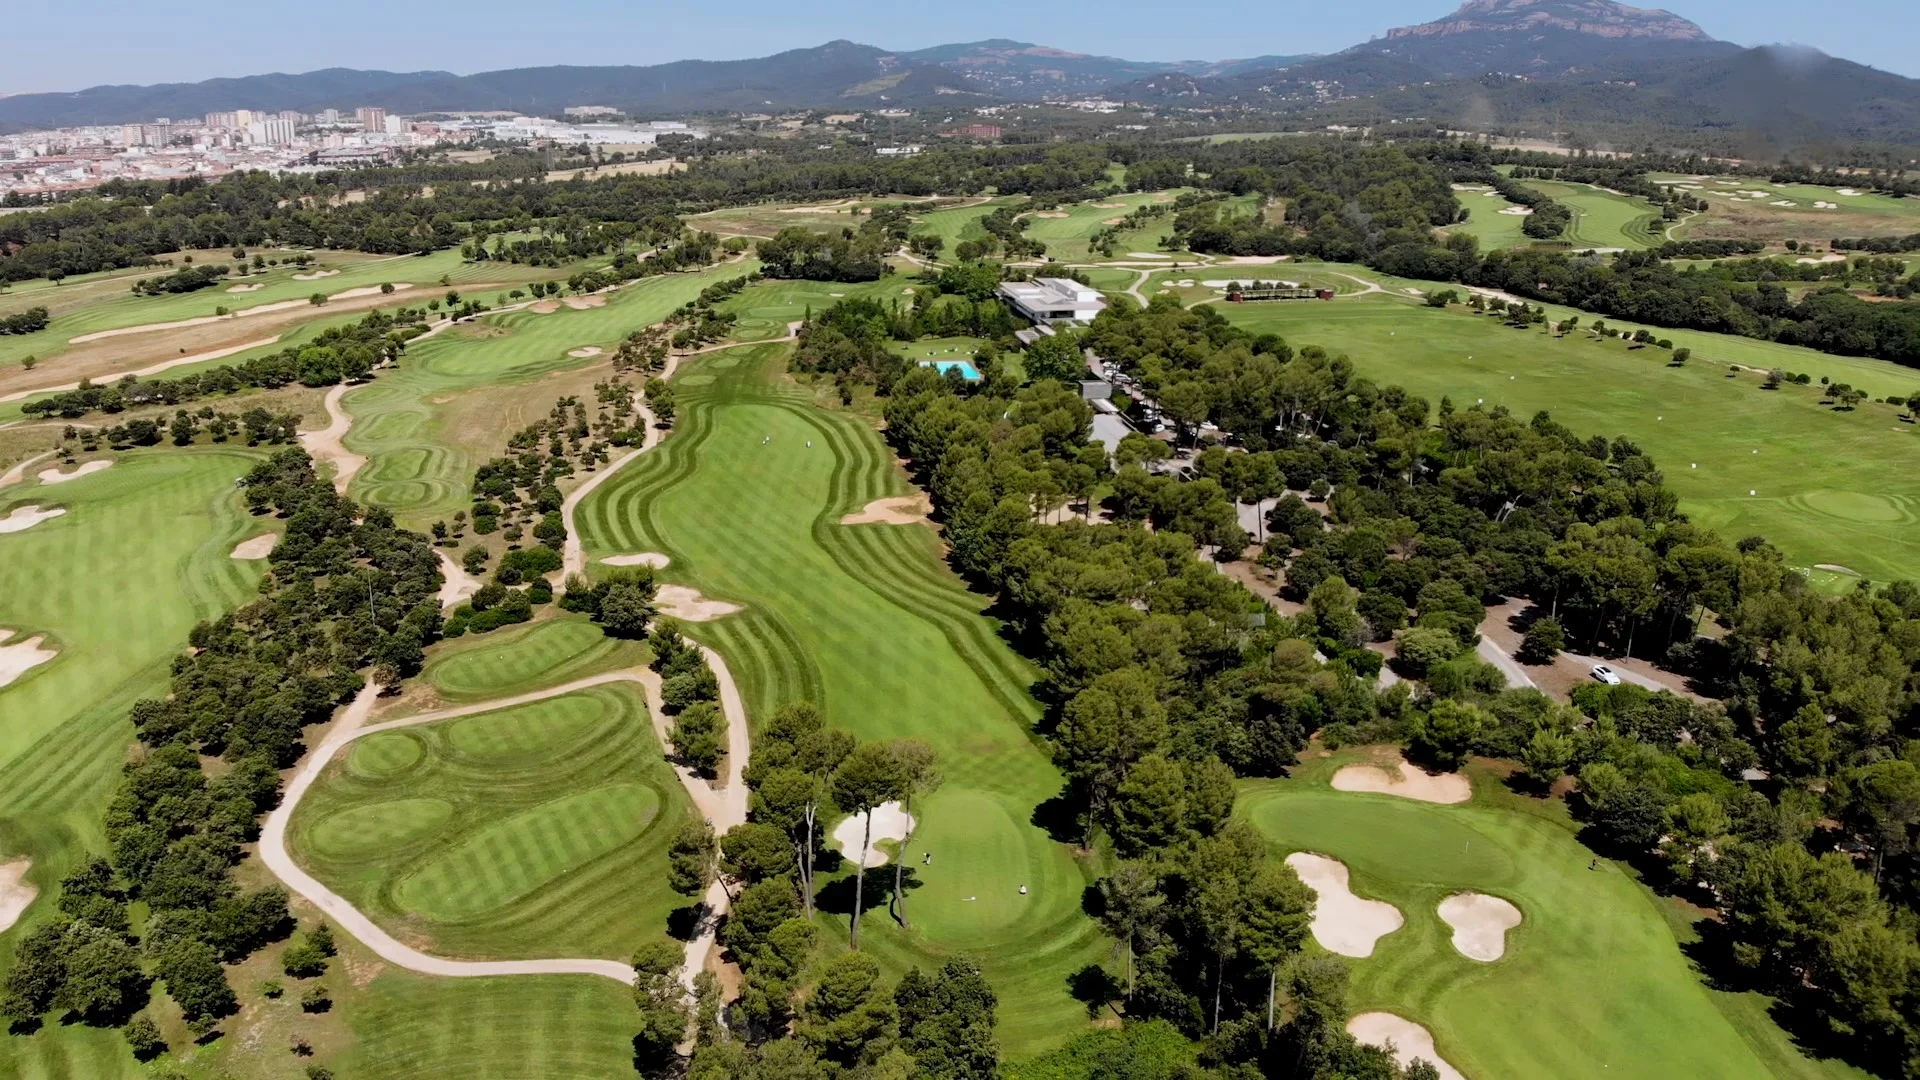 real-club-de-golf-el-prat-aerial-view-yellow-course-club-house-and-driving-range_43790633054_o